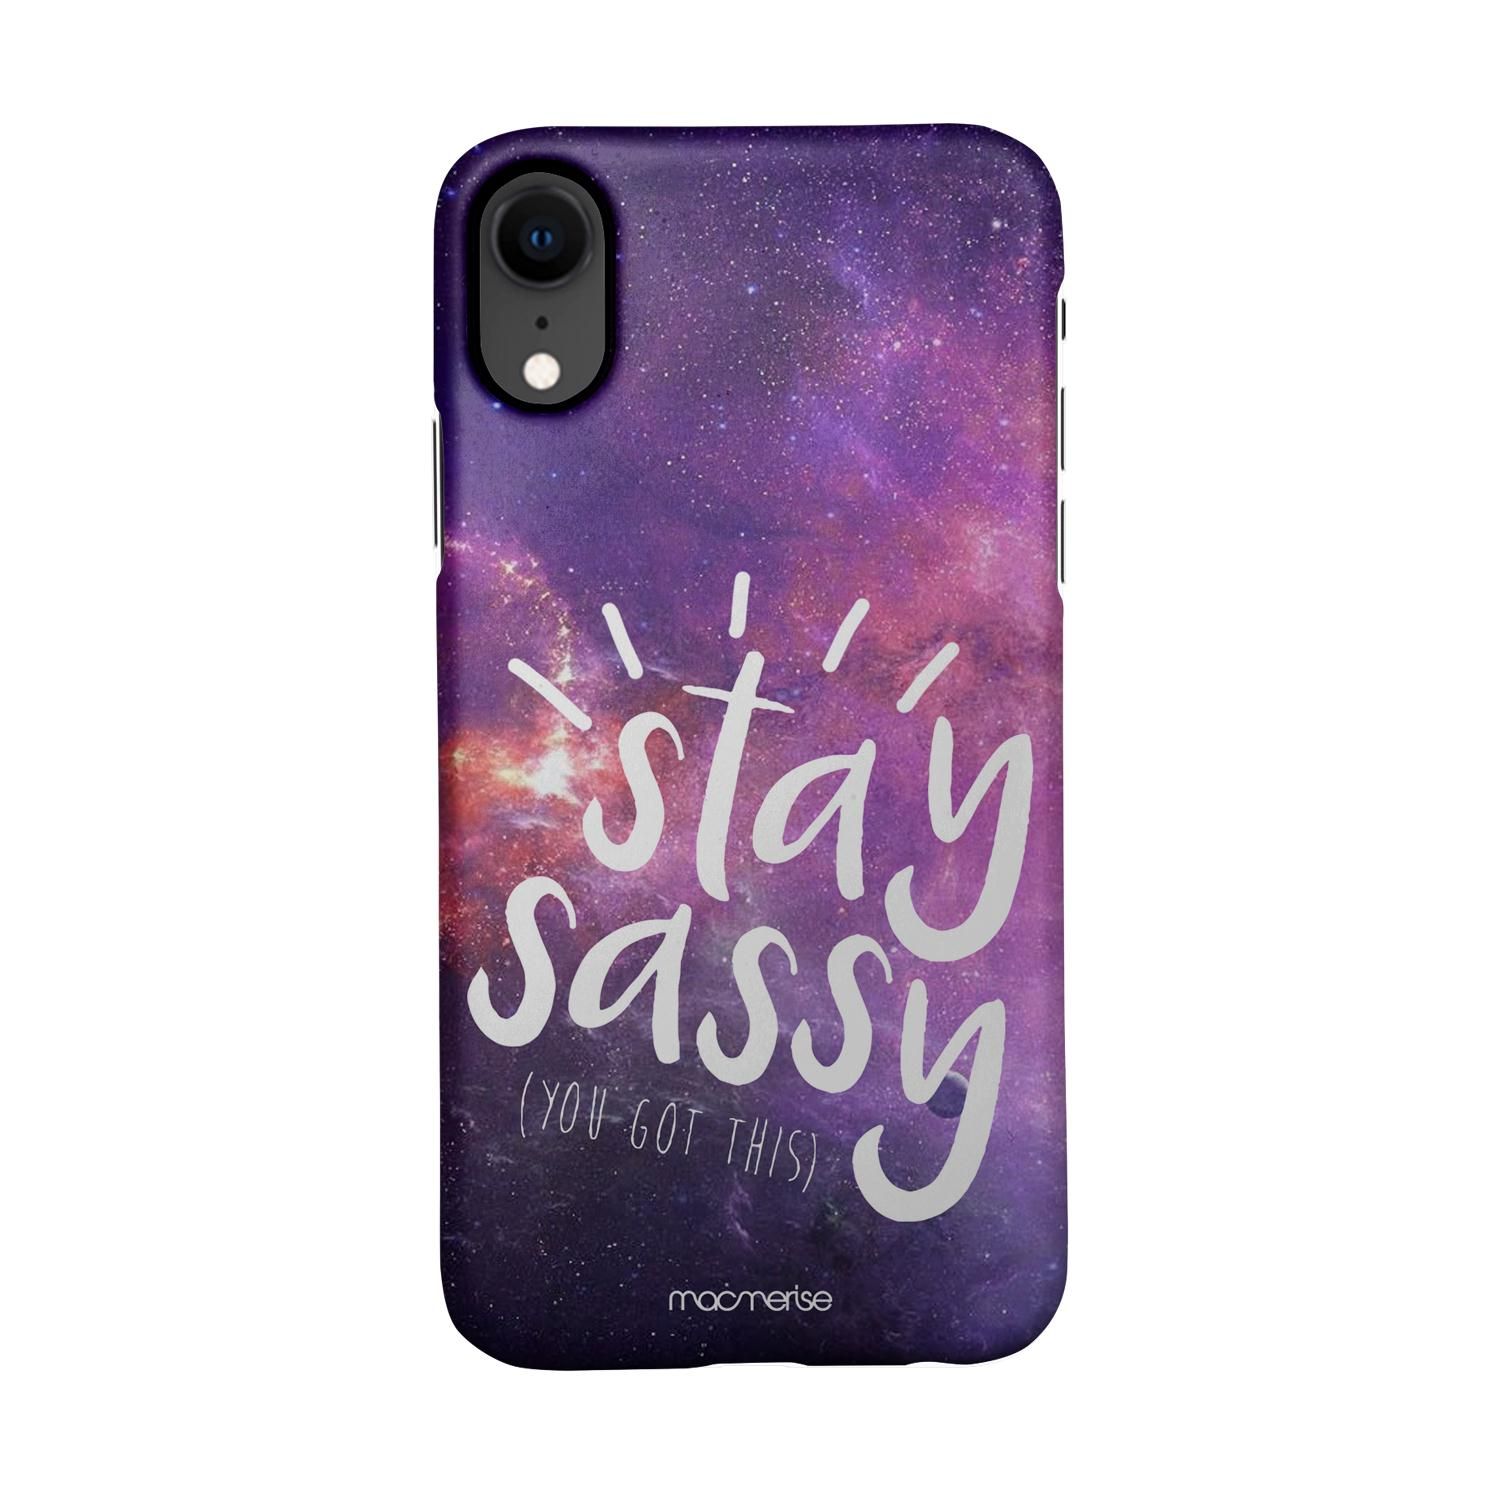 Buy Stay Sassy - Sleek Phone Case for iPhone XR Online